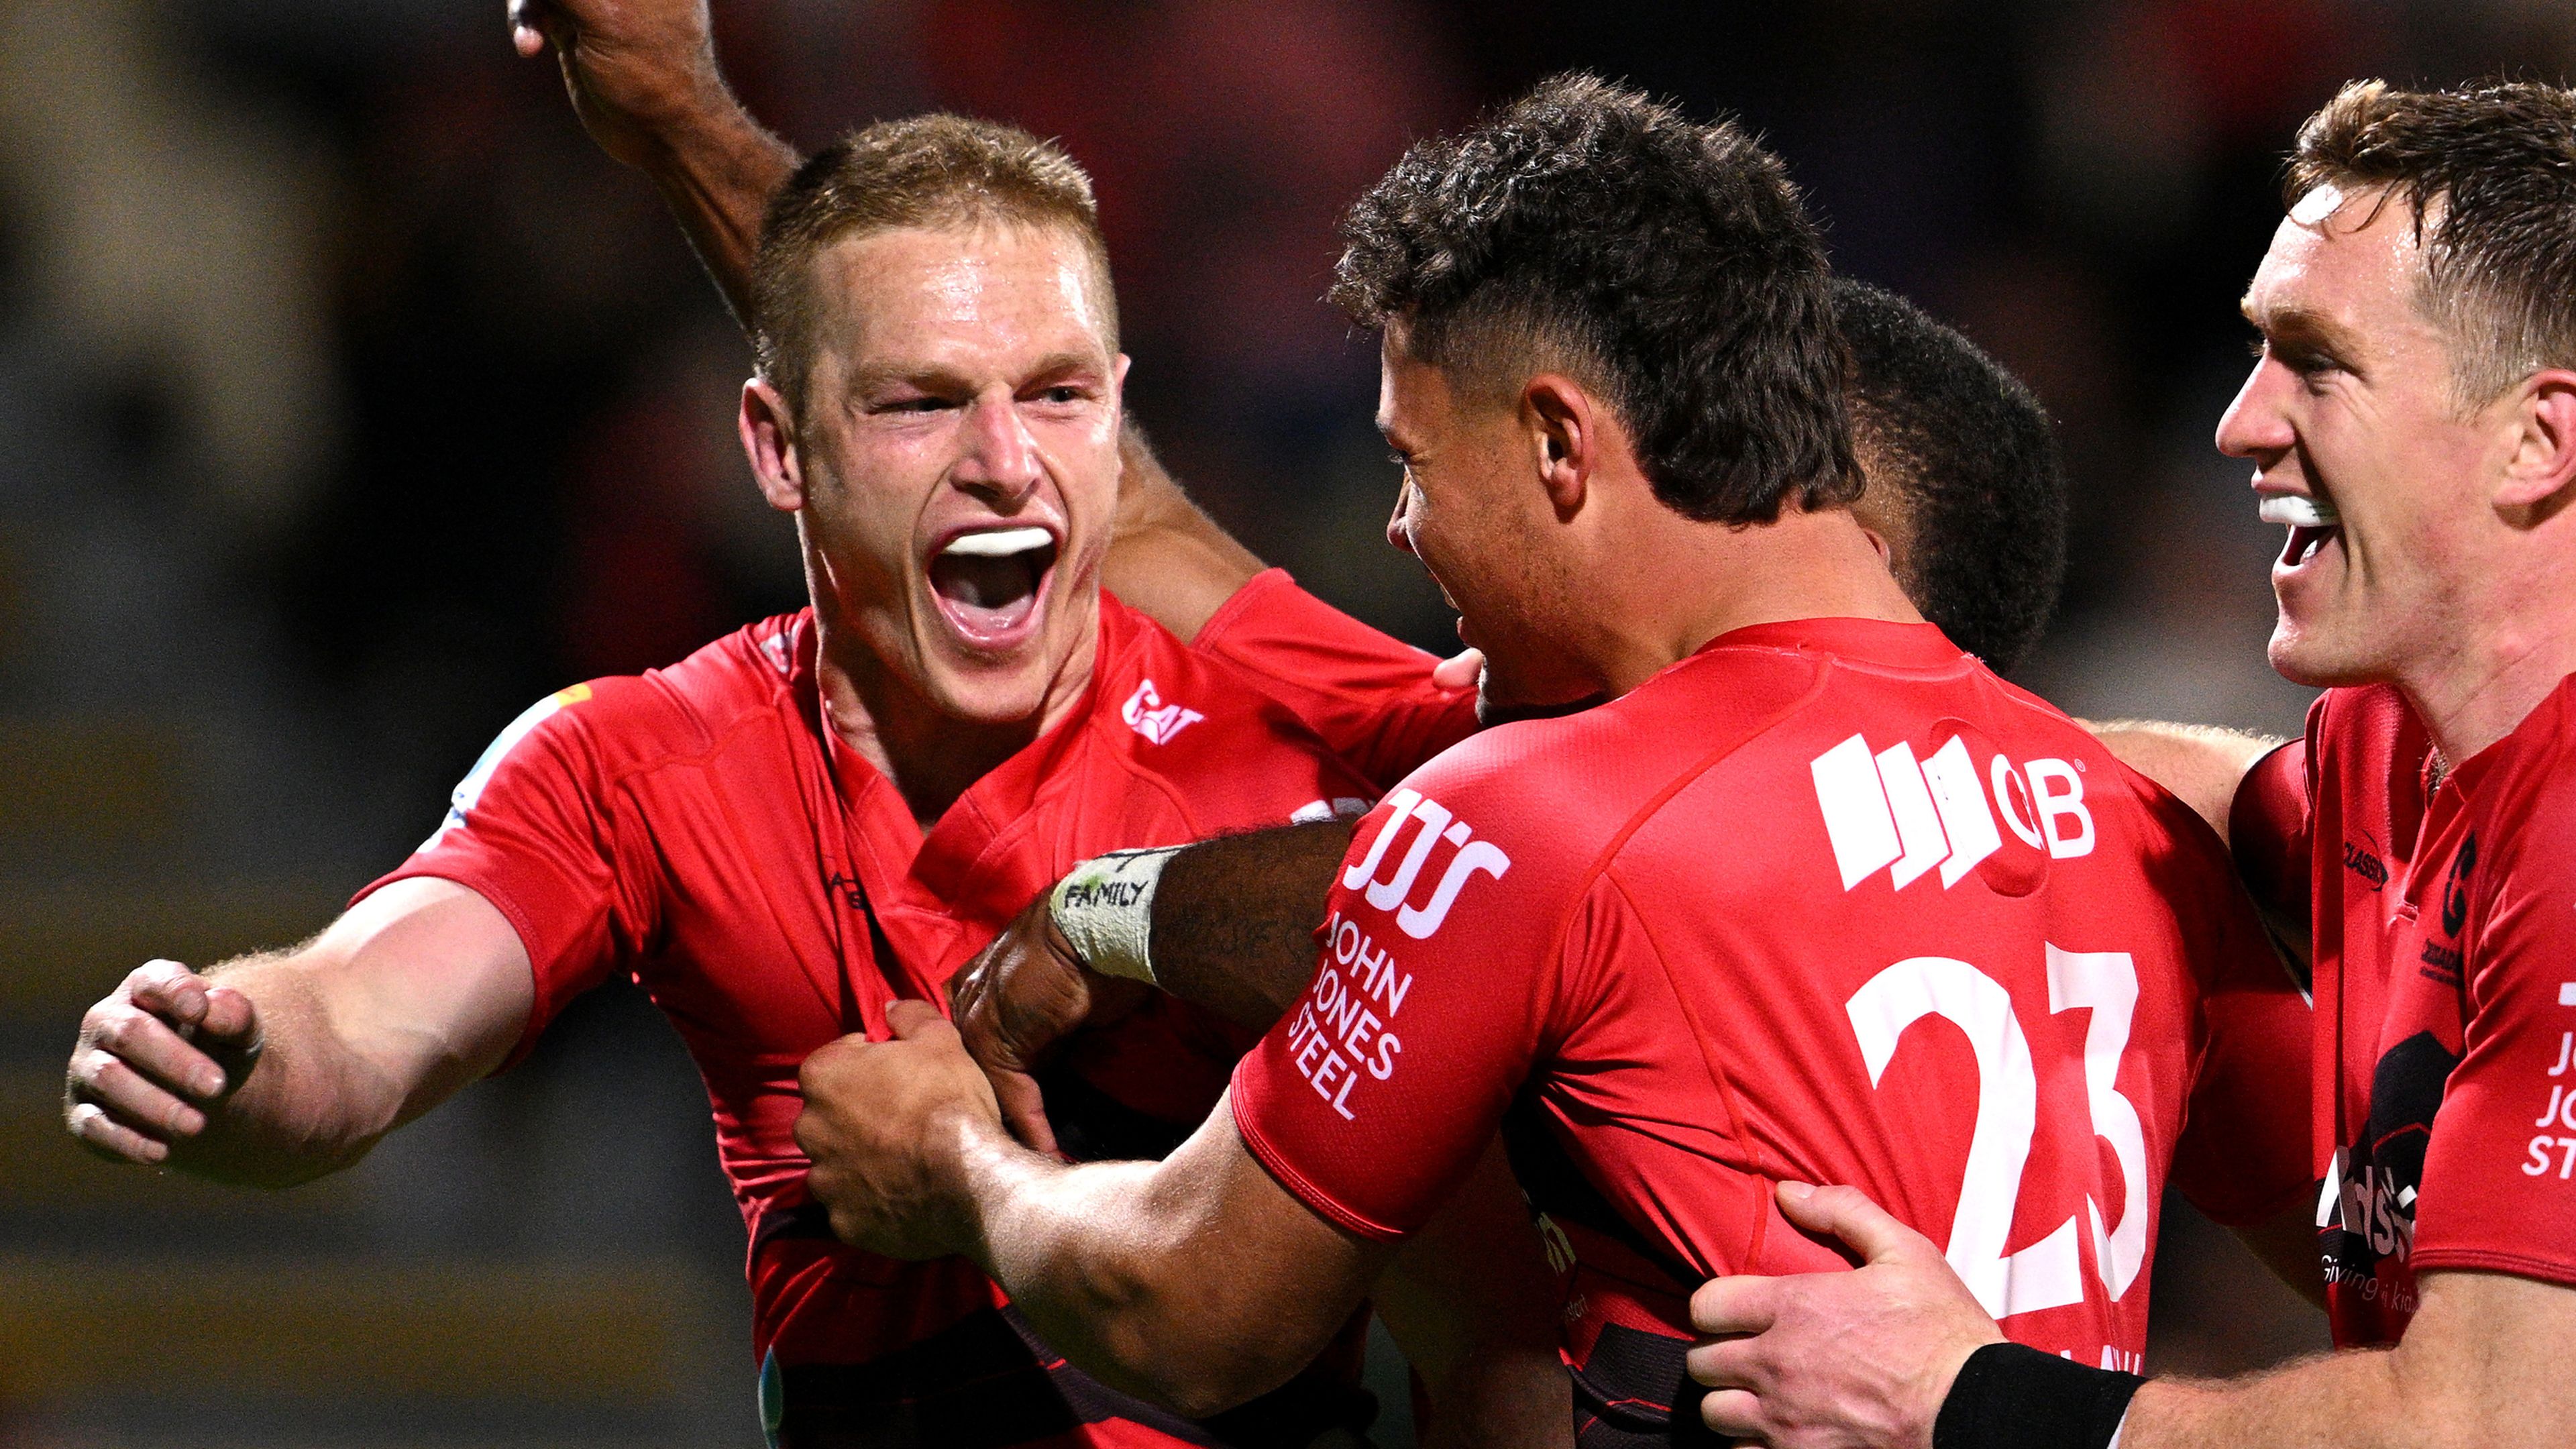 Johnny McNicholl of the Crusaders celebrates after scoring a try during the round six Super Rugby Pacific match between Crusaders and Chiefs.